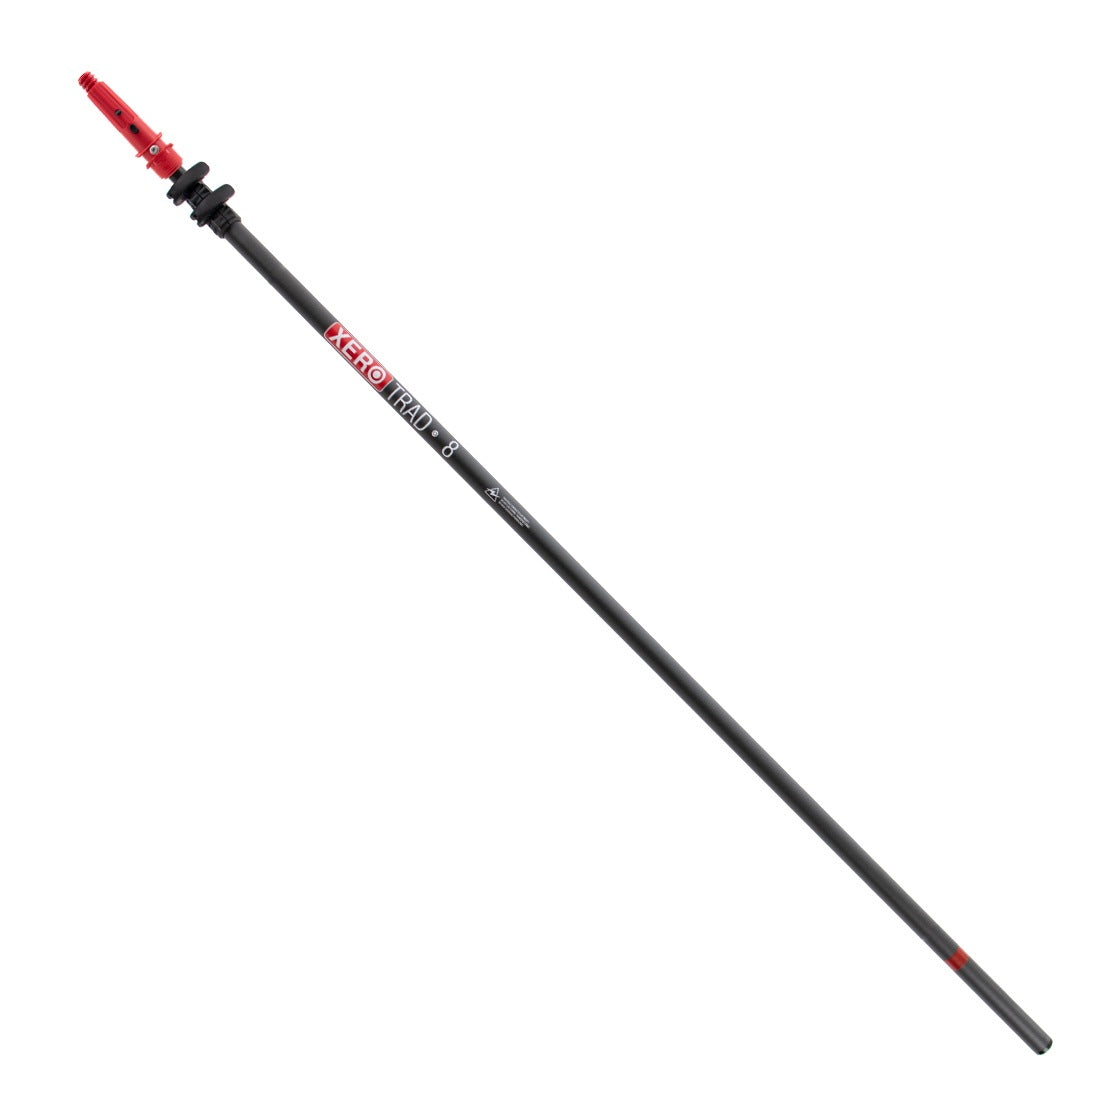 XERO Trad Pole 2.0 Unger Tip 8 Foot Front View